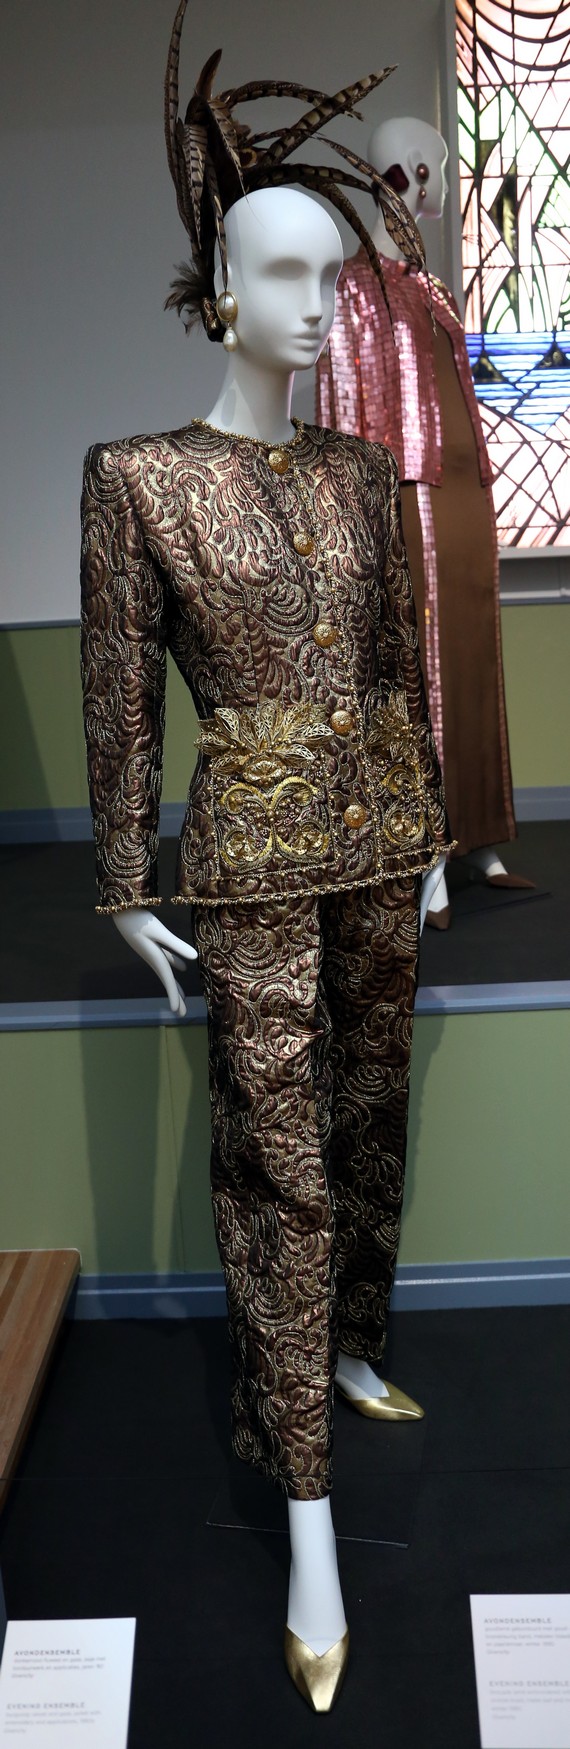 1990s fashion - Givency evening suit, 1990